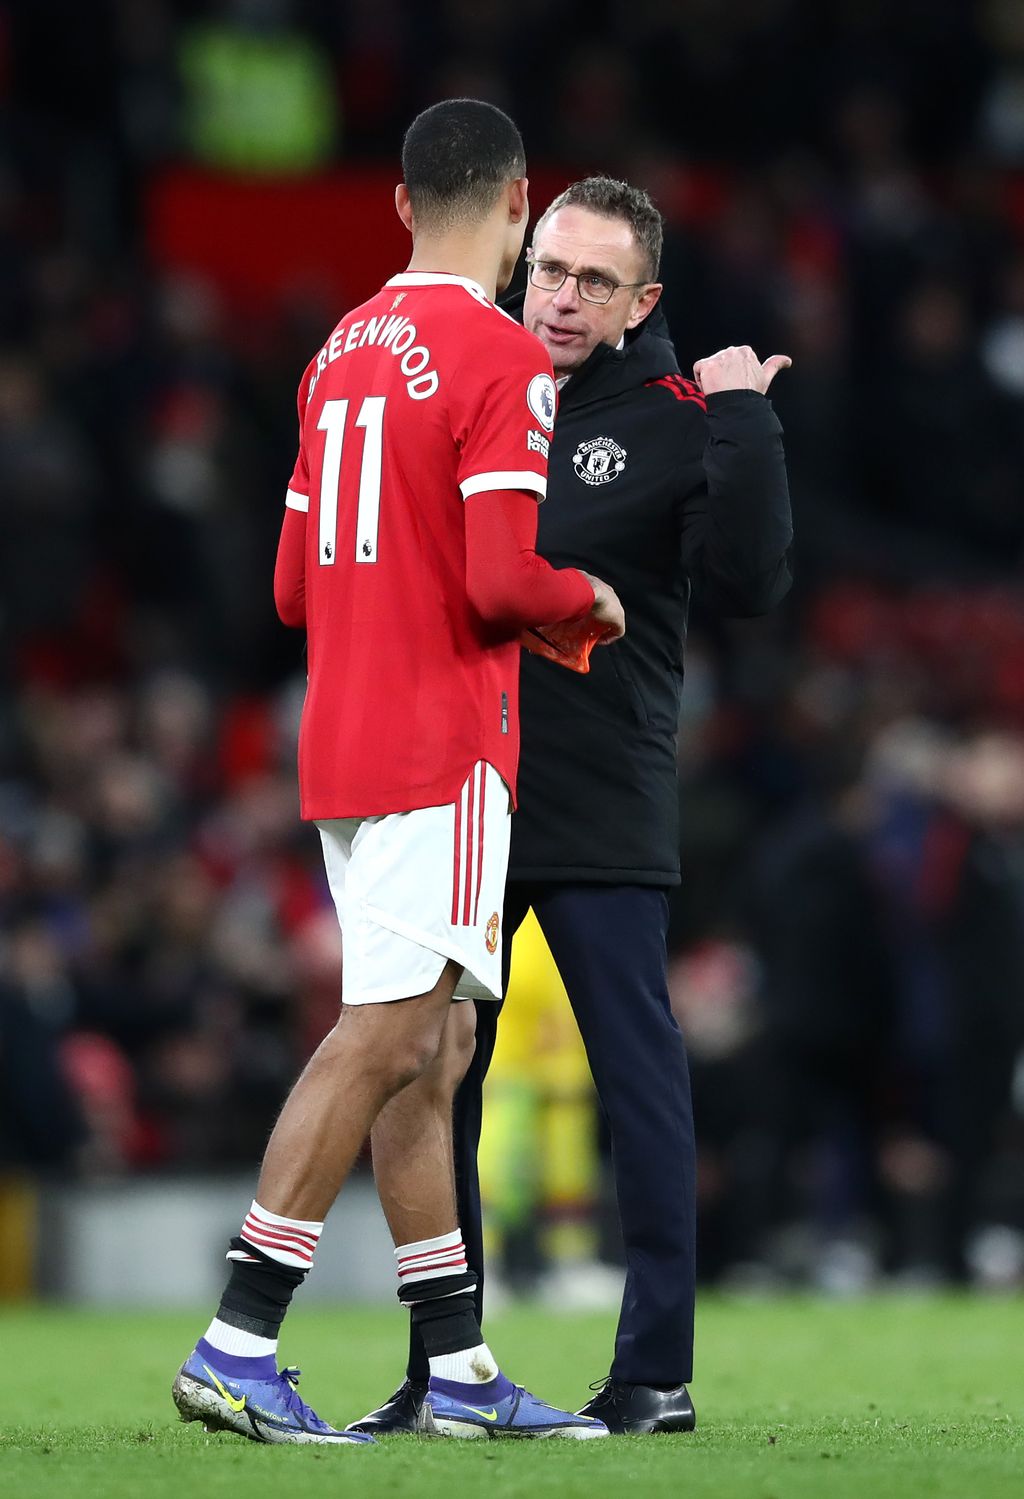 MANCHESTER, ENGLAND - DECEMBER 05: Mason Greenwood of Manchester United in discusion with Ralf Rangnick, Manager of Manchester United after the Premier League match between Manchester United and Crystal Palace at Old Trafford on December 05, 2021 in Manchester, England. (Photo by Jan Kruger/Getty Images)